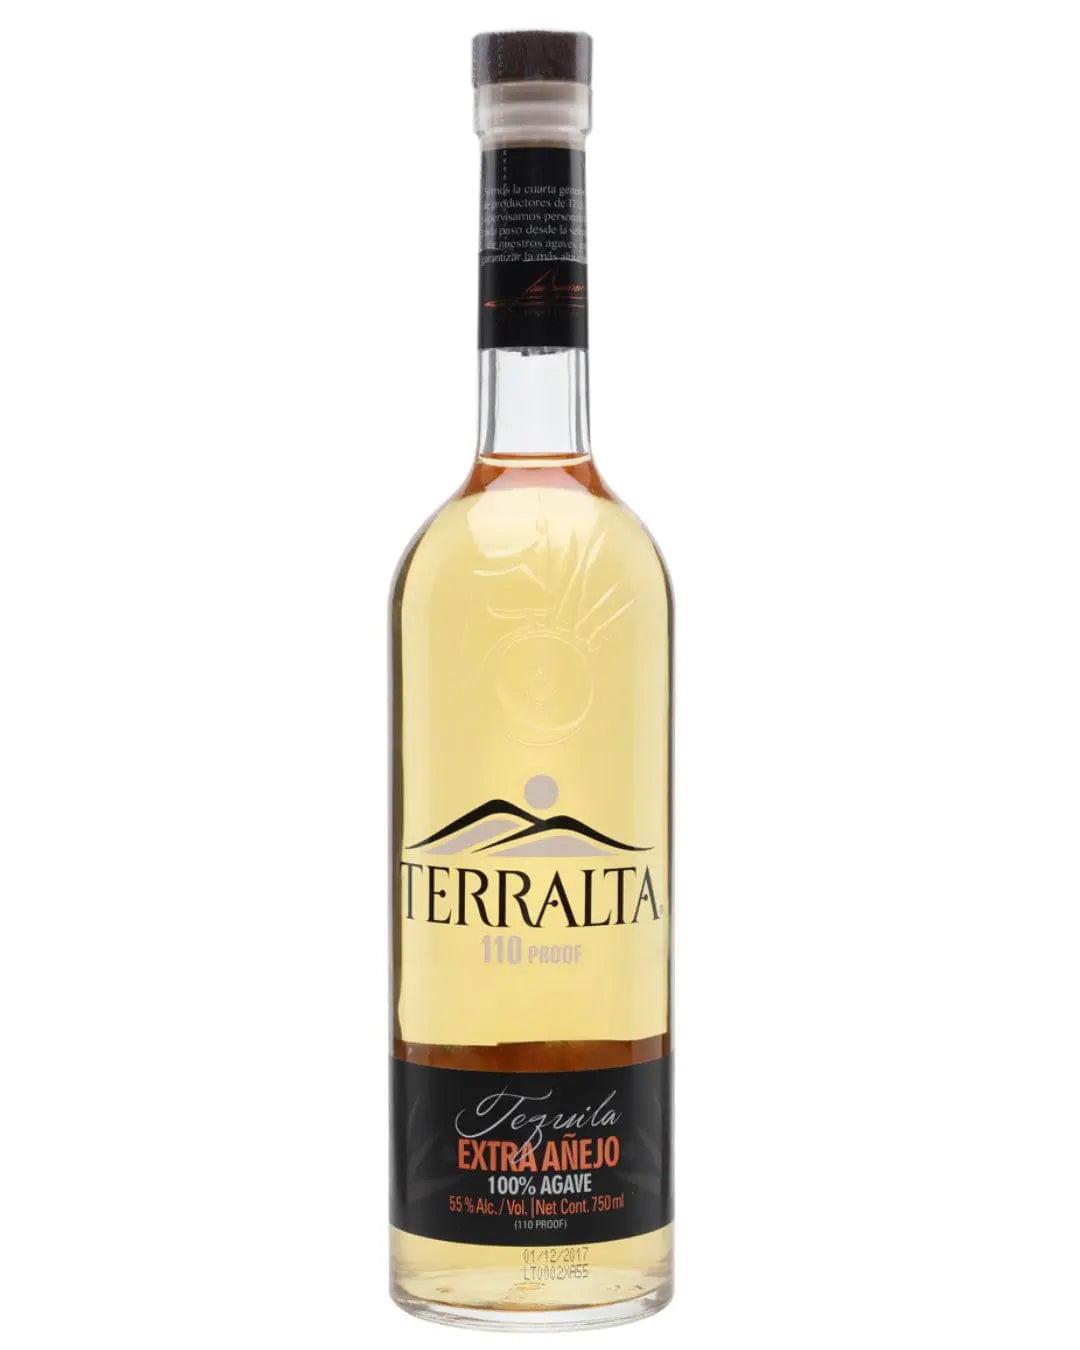 Terralta Extra Anejo 110 Proof Tequila, 75 cl Tequila & Mezcal